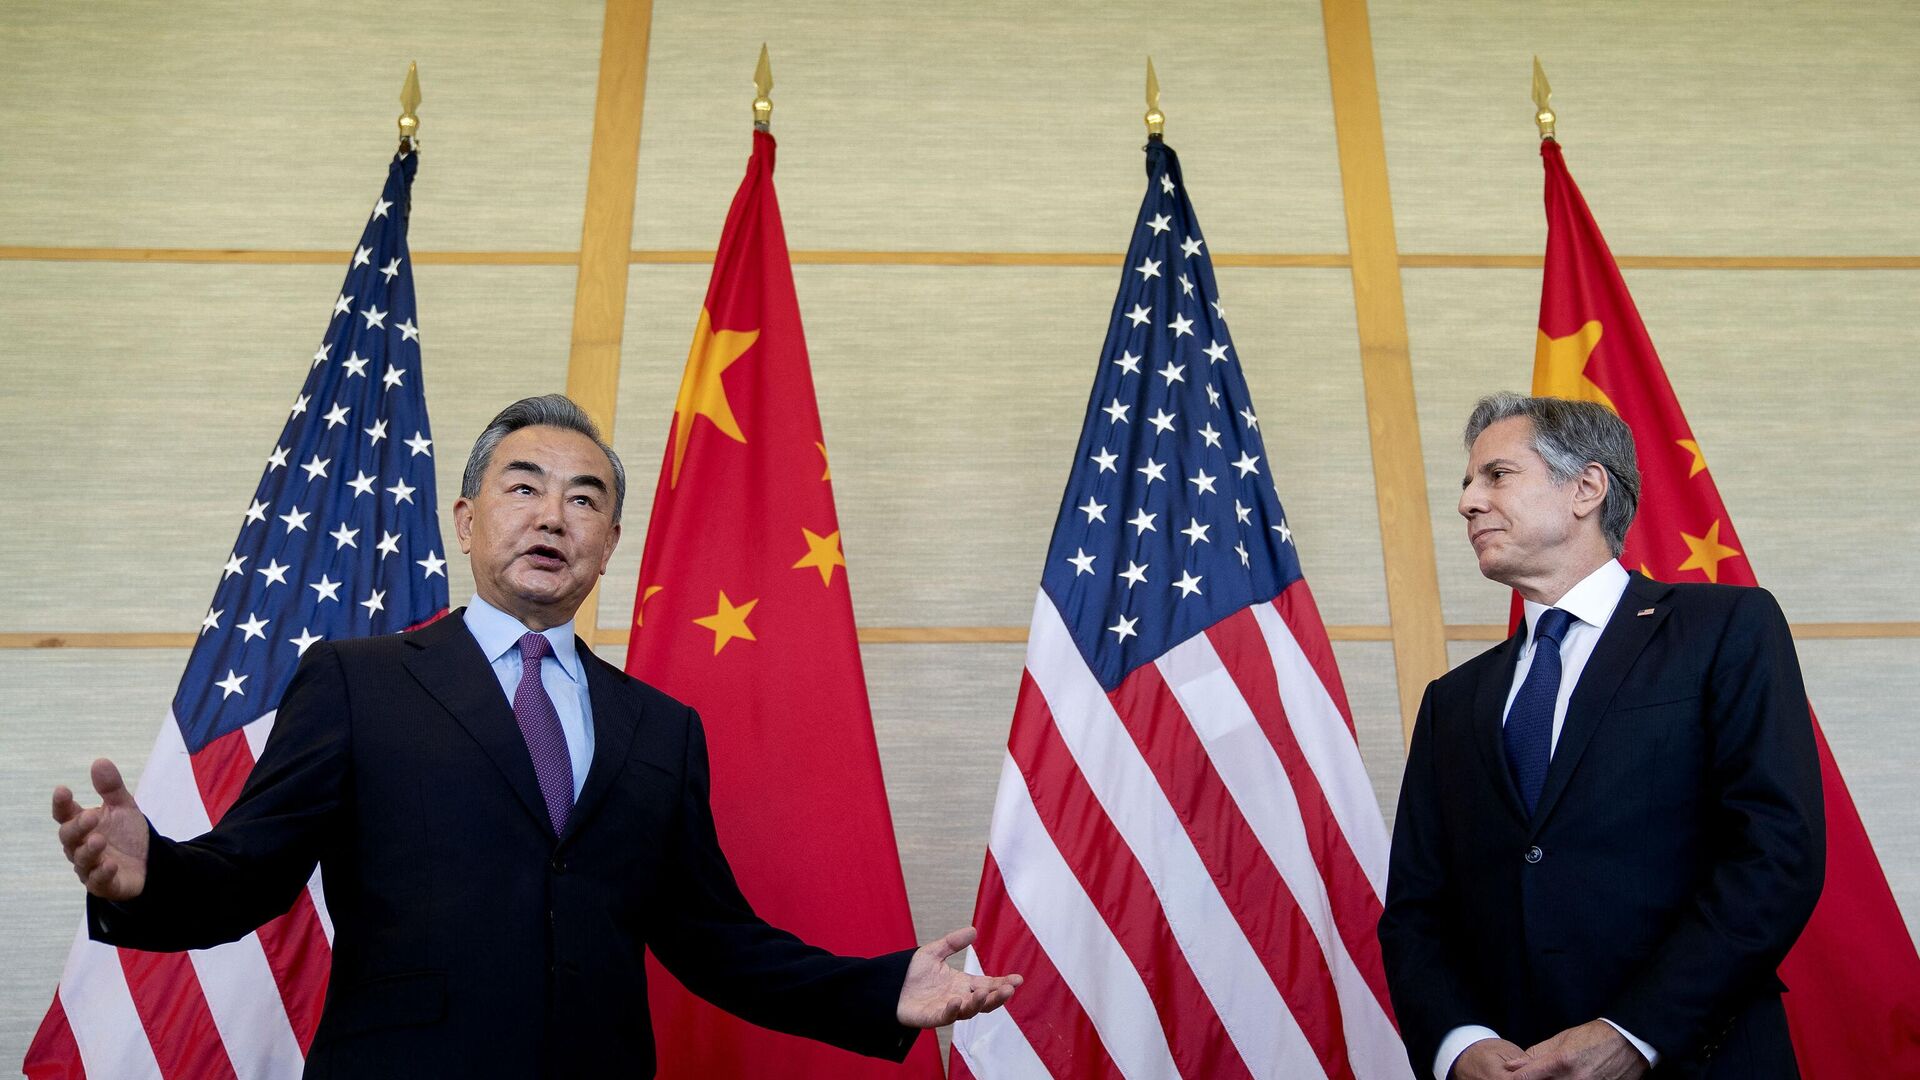 US Secretary of State Antony Blinken (R) and China's Foreign Minister Wang Yi attend a meeting in Nusa Dua on the Indonesian resort island of Bali on July 9, 2022 - Sputnik International, 1920, 03.02.2023